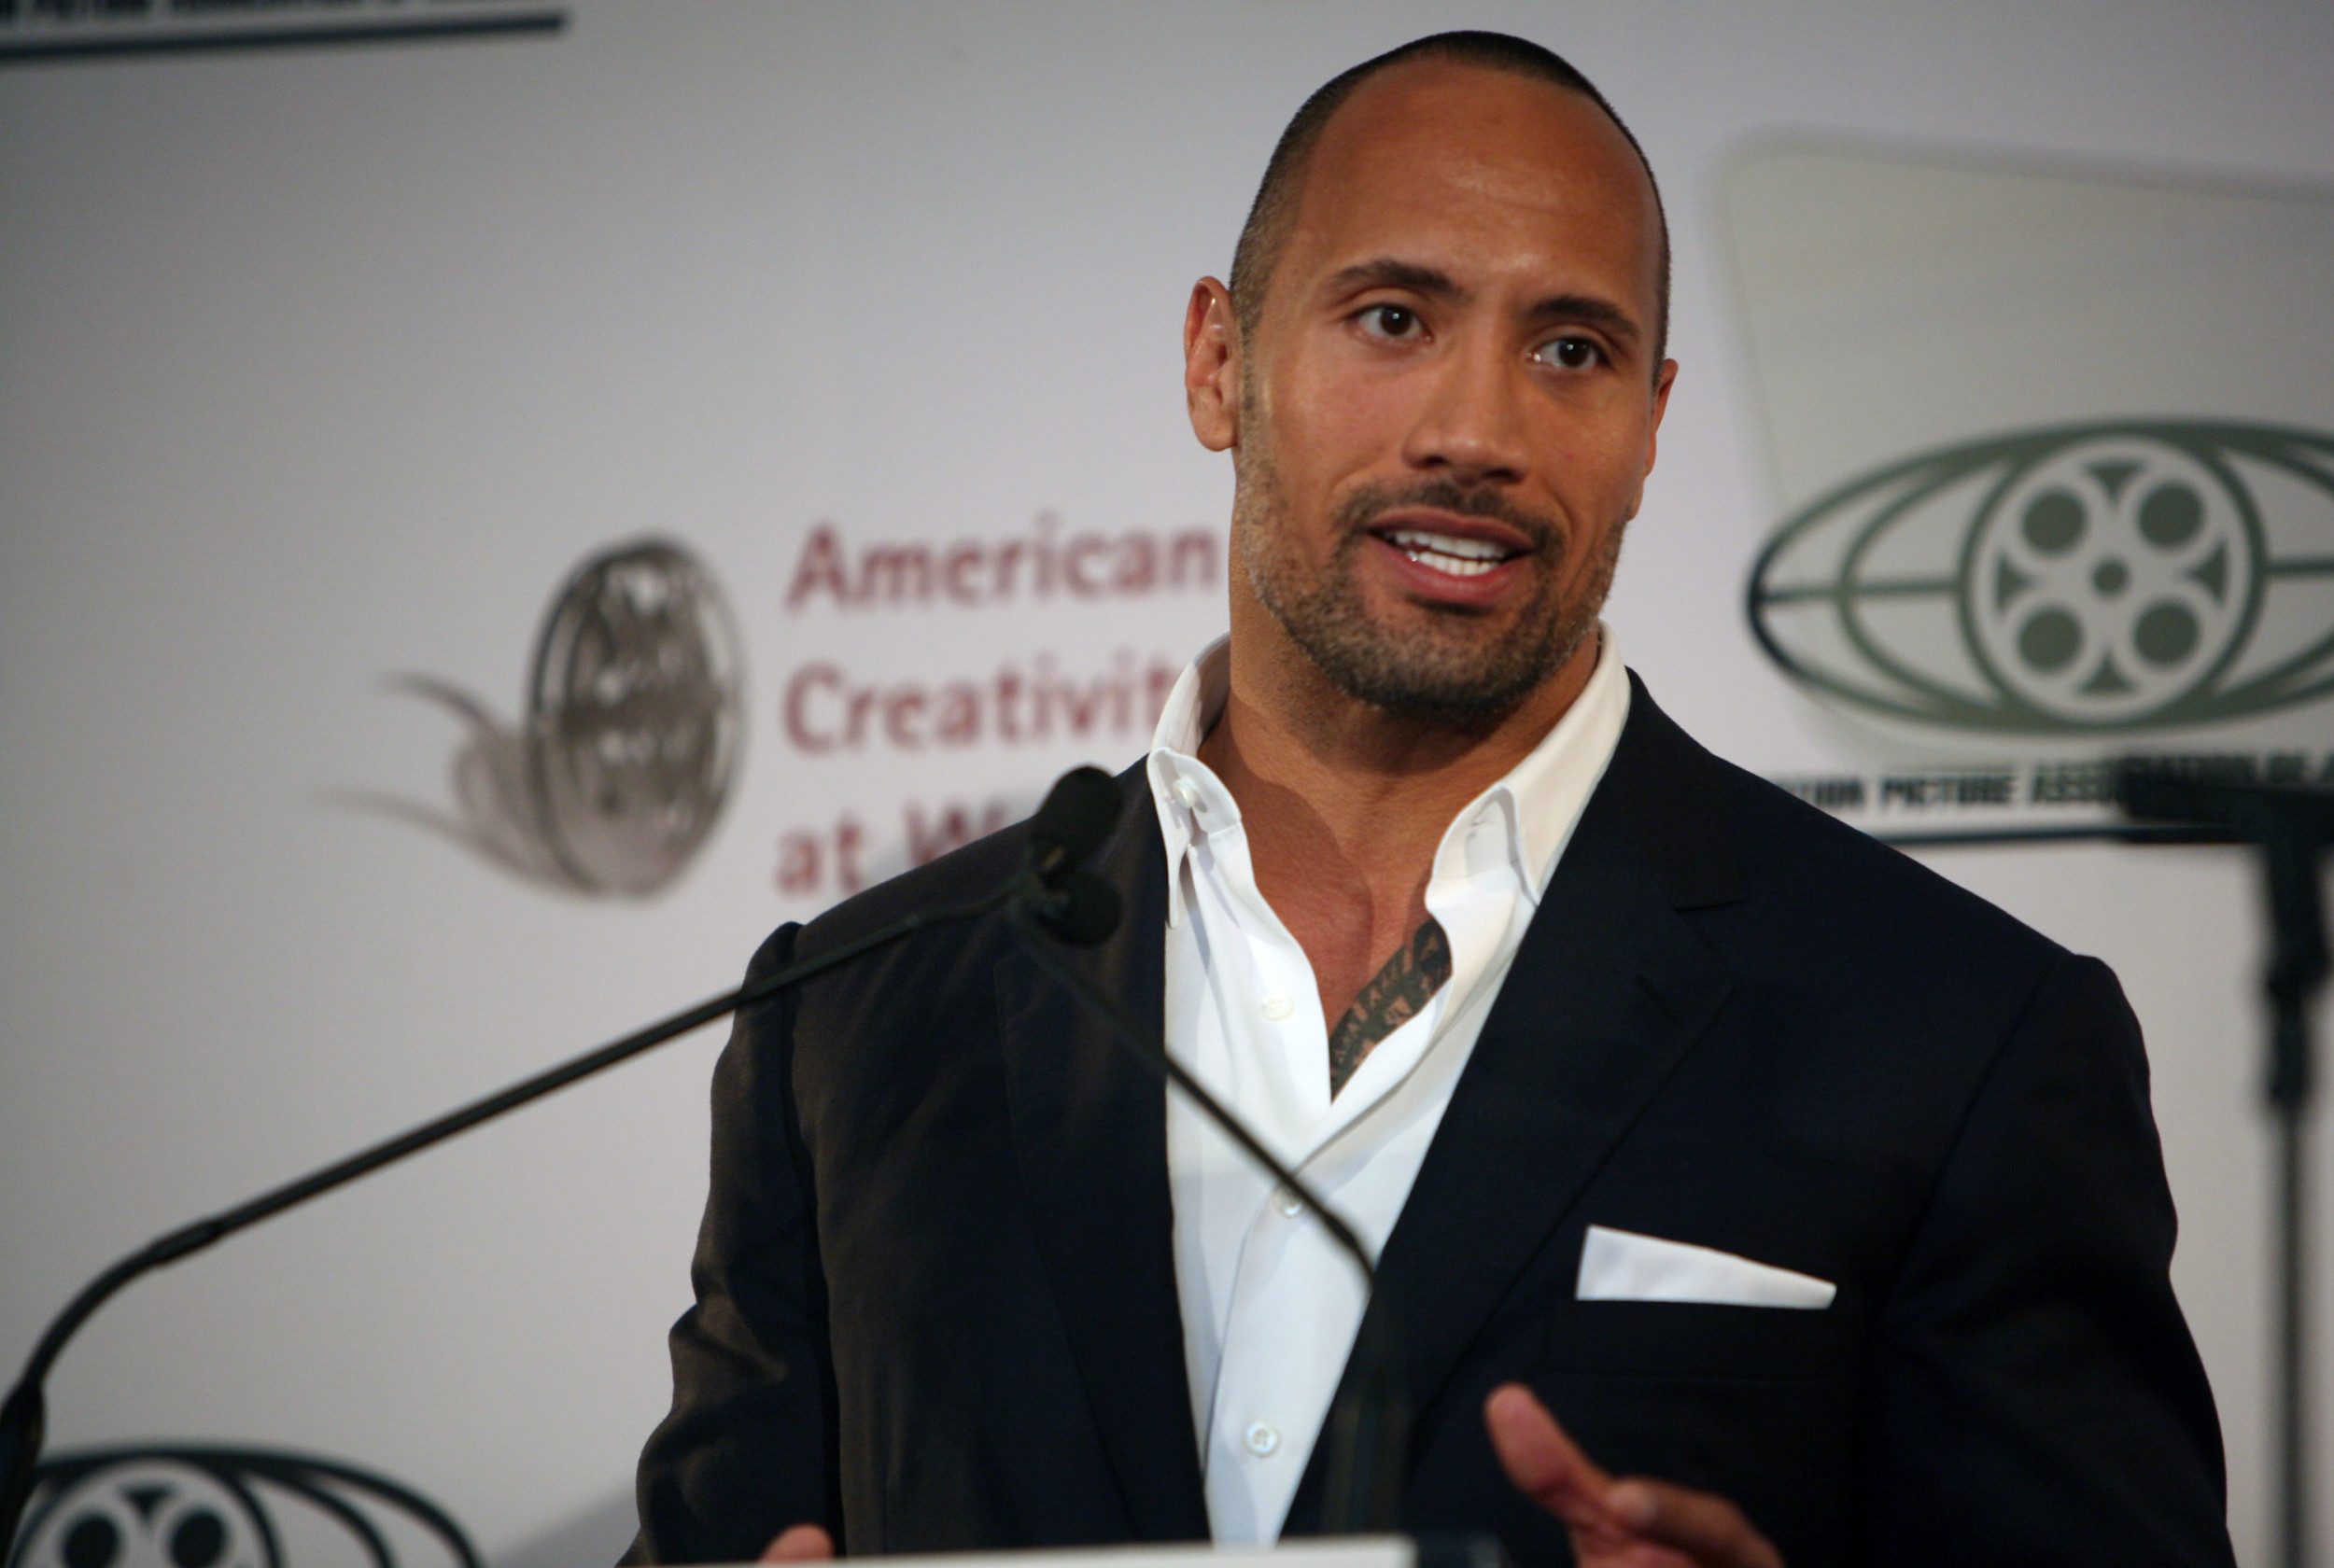 Dwayne Johnson's Latest Hosting Gig May Be More Than Another Paycheck